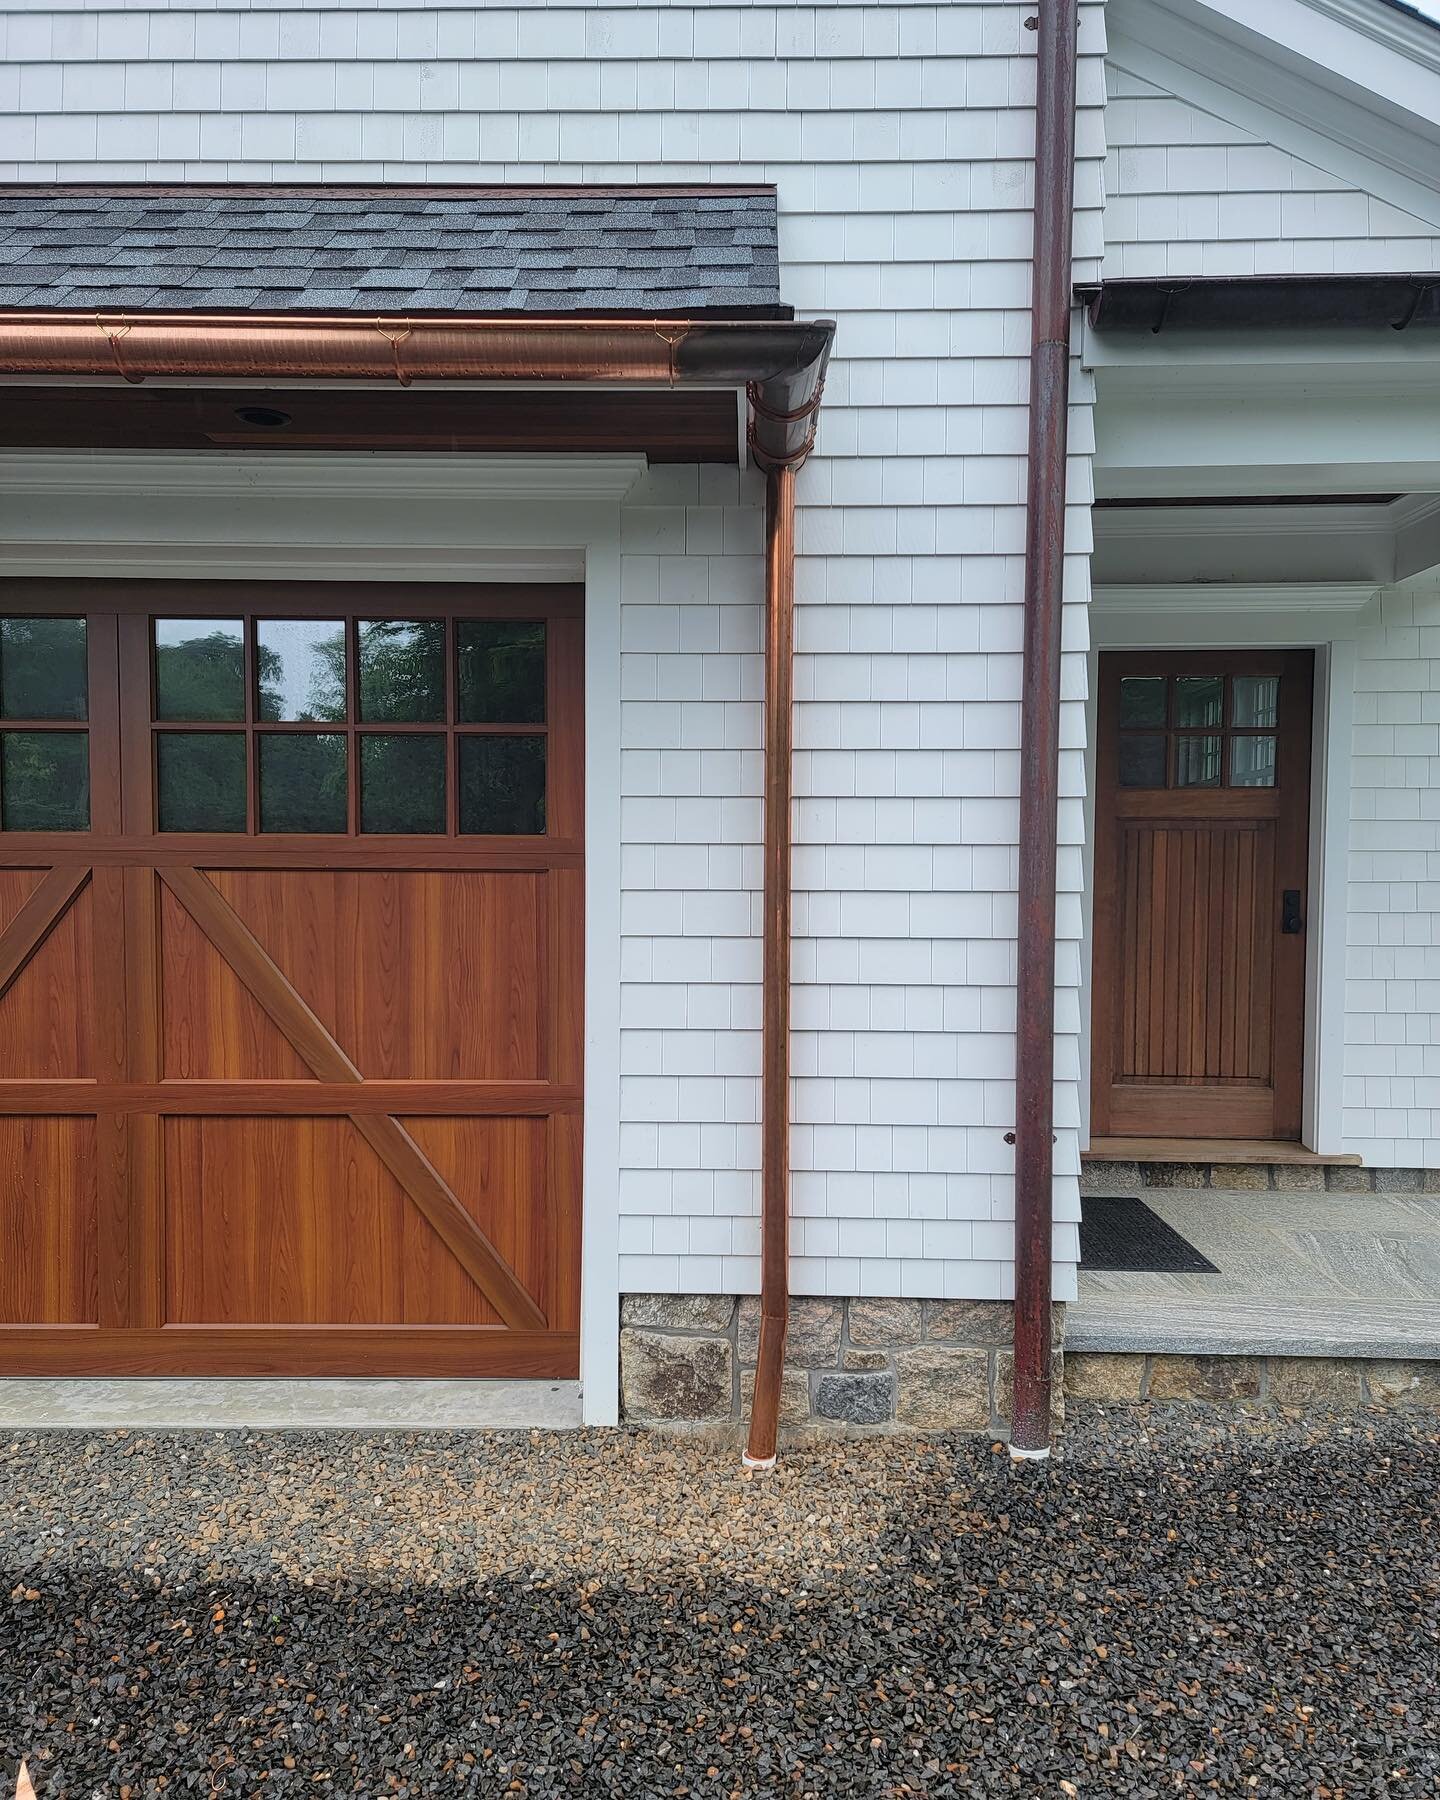 And then&hellip;. There&rsquo;s Copper. Copper. Enough said.  #gutters #guttersanddownspouts #coppergutters #GuttersConnecticut #ConnecticutWestchesterGutters #WestchesterGutters #GreenwichGutters #LitchfieldcountyGutters #bestgutters